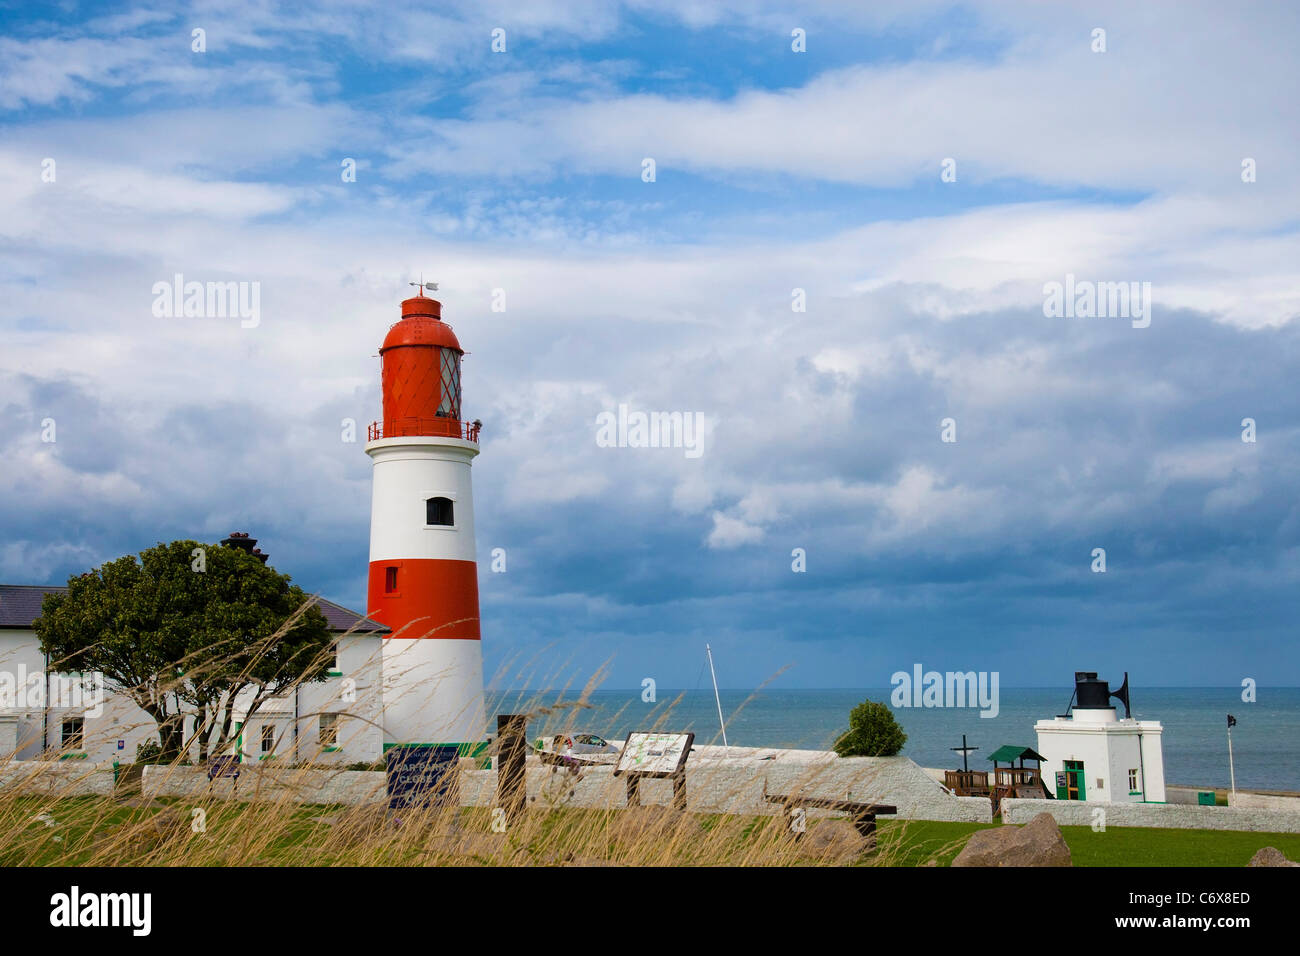 Souter lighthouse and lighthouse keepers cottage, Sunderland, Tyne and Wear, UK. Stock Photo